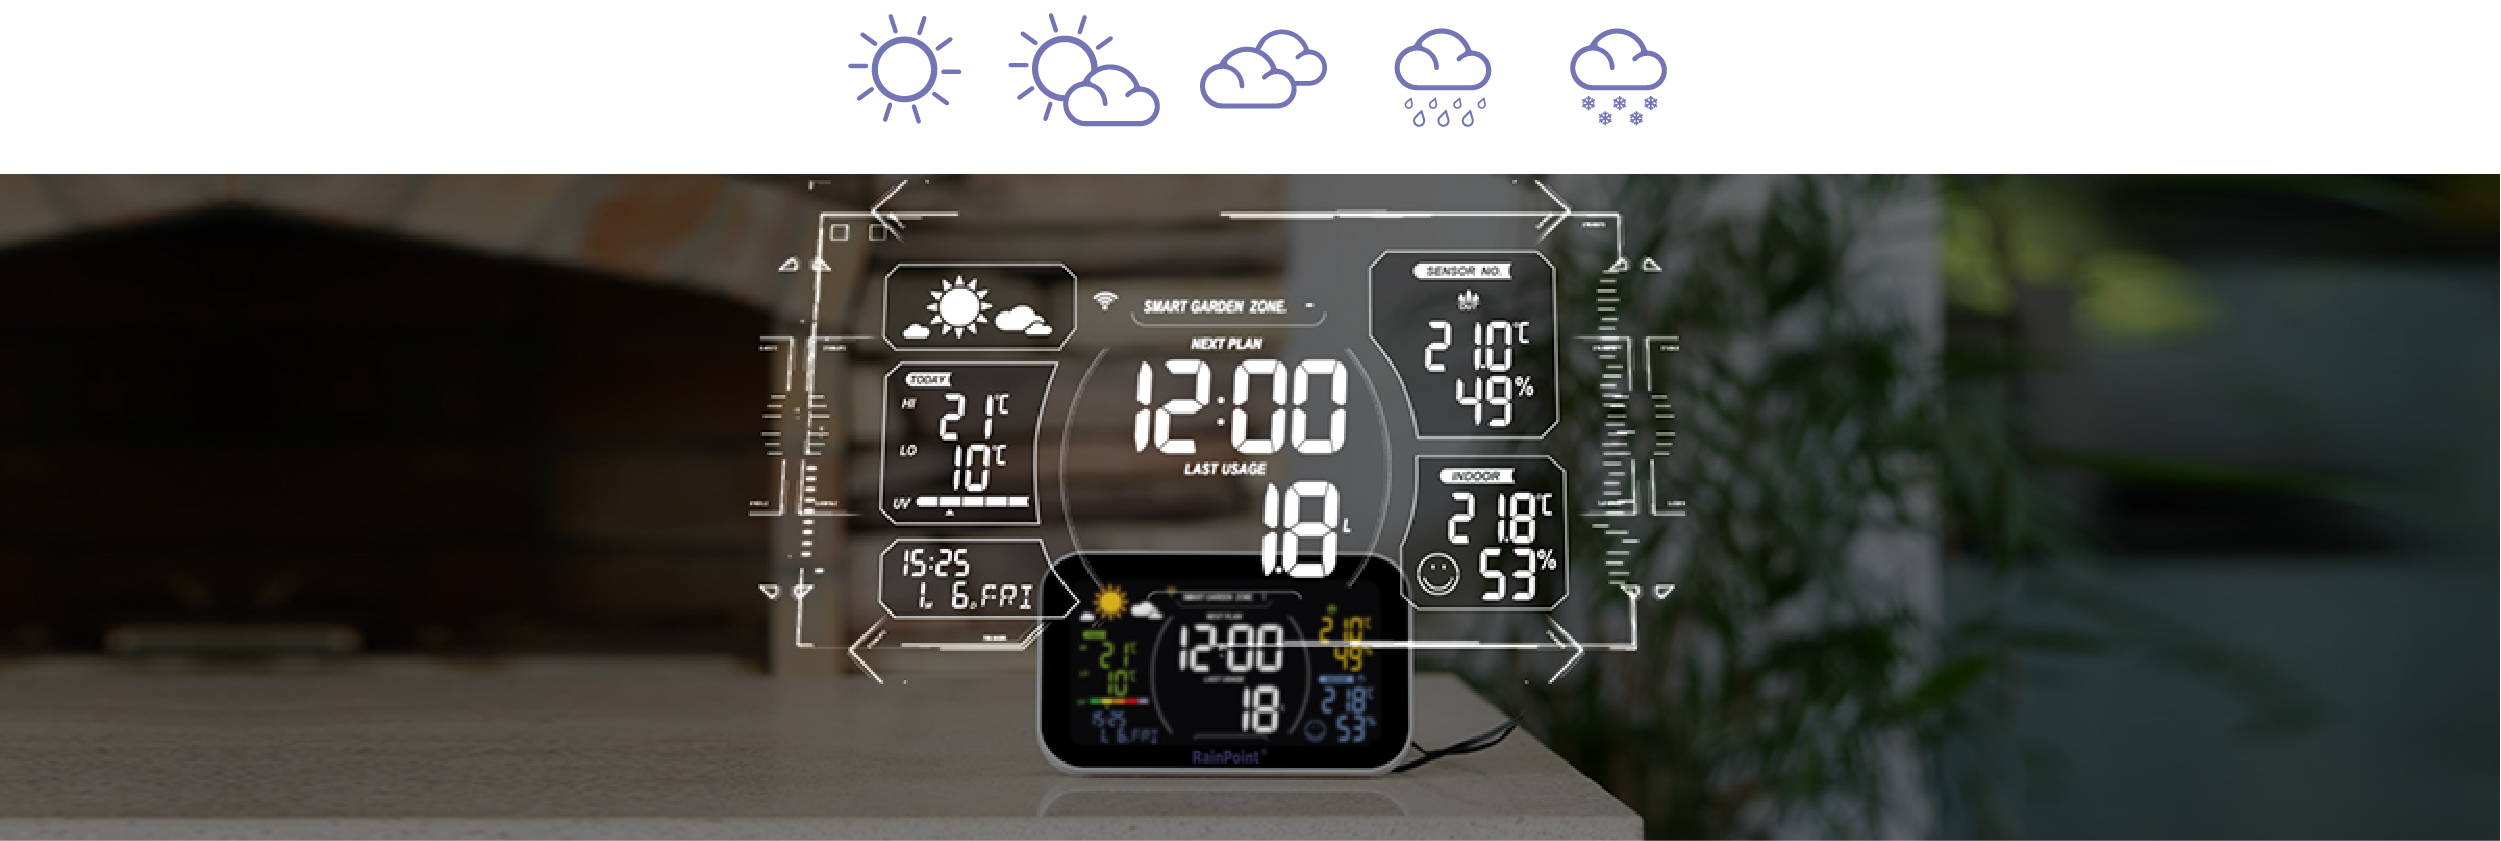 The gateway screen displays the weather forecast, so users can  temporarily adjust the plan according to the forecast.